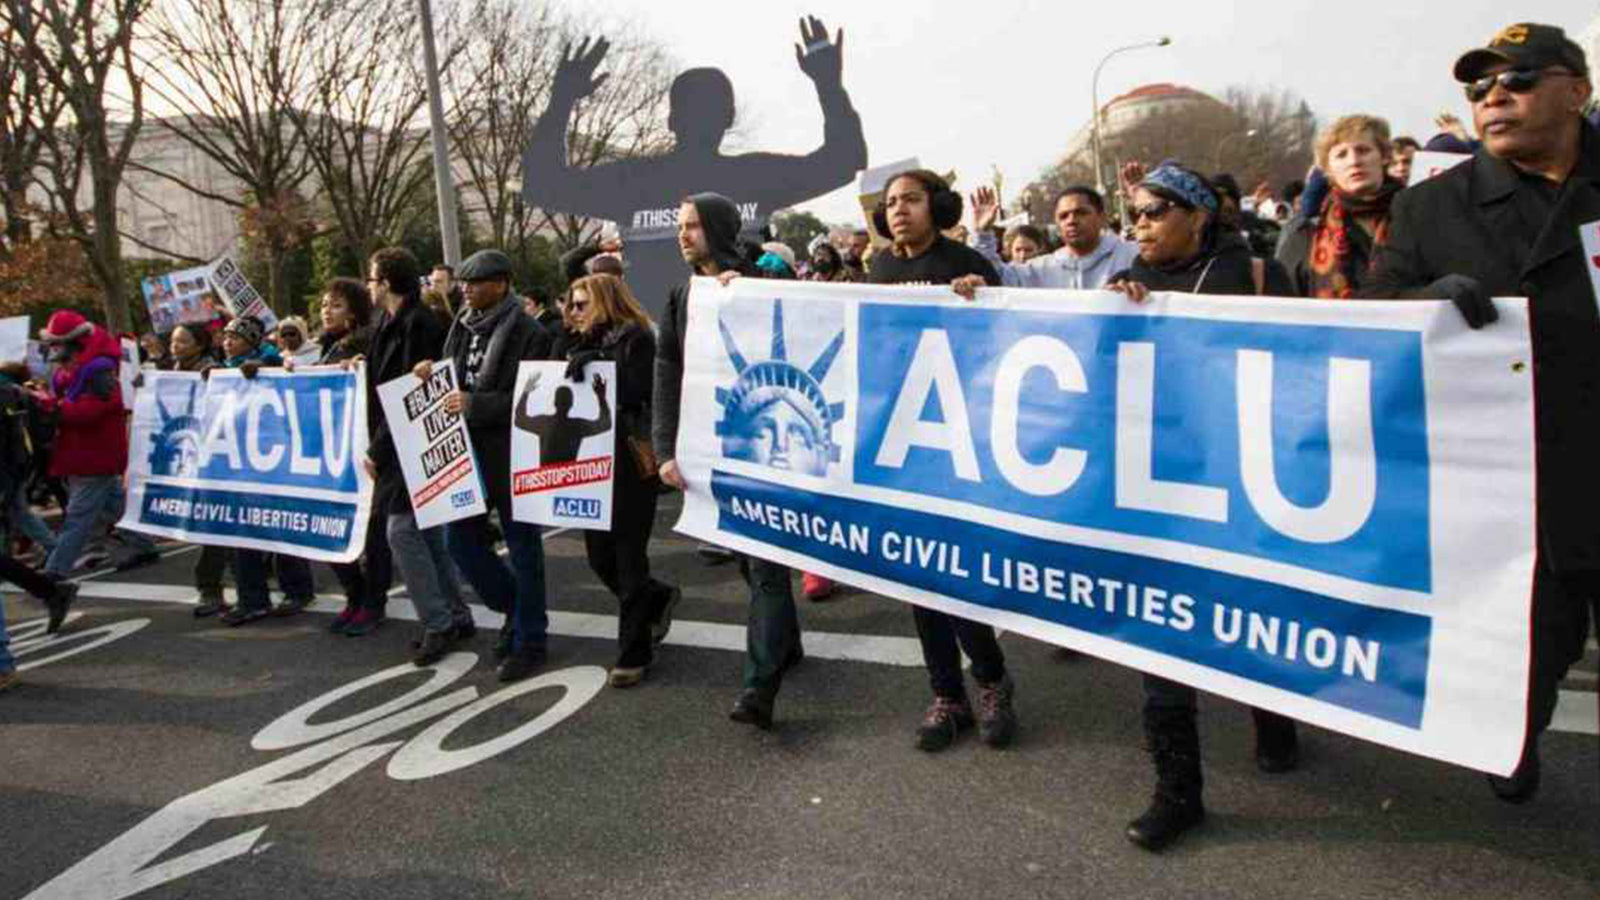 People marching with an ACLU banner.